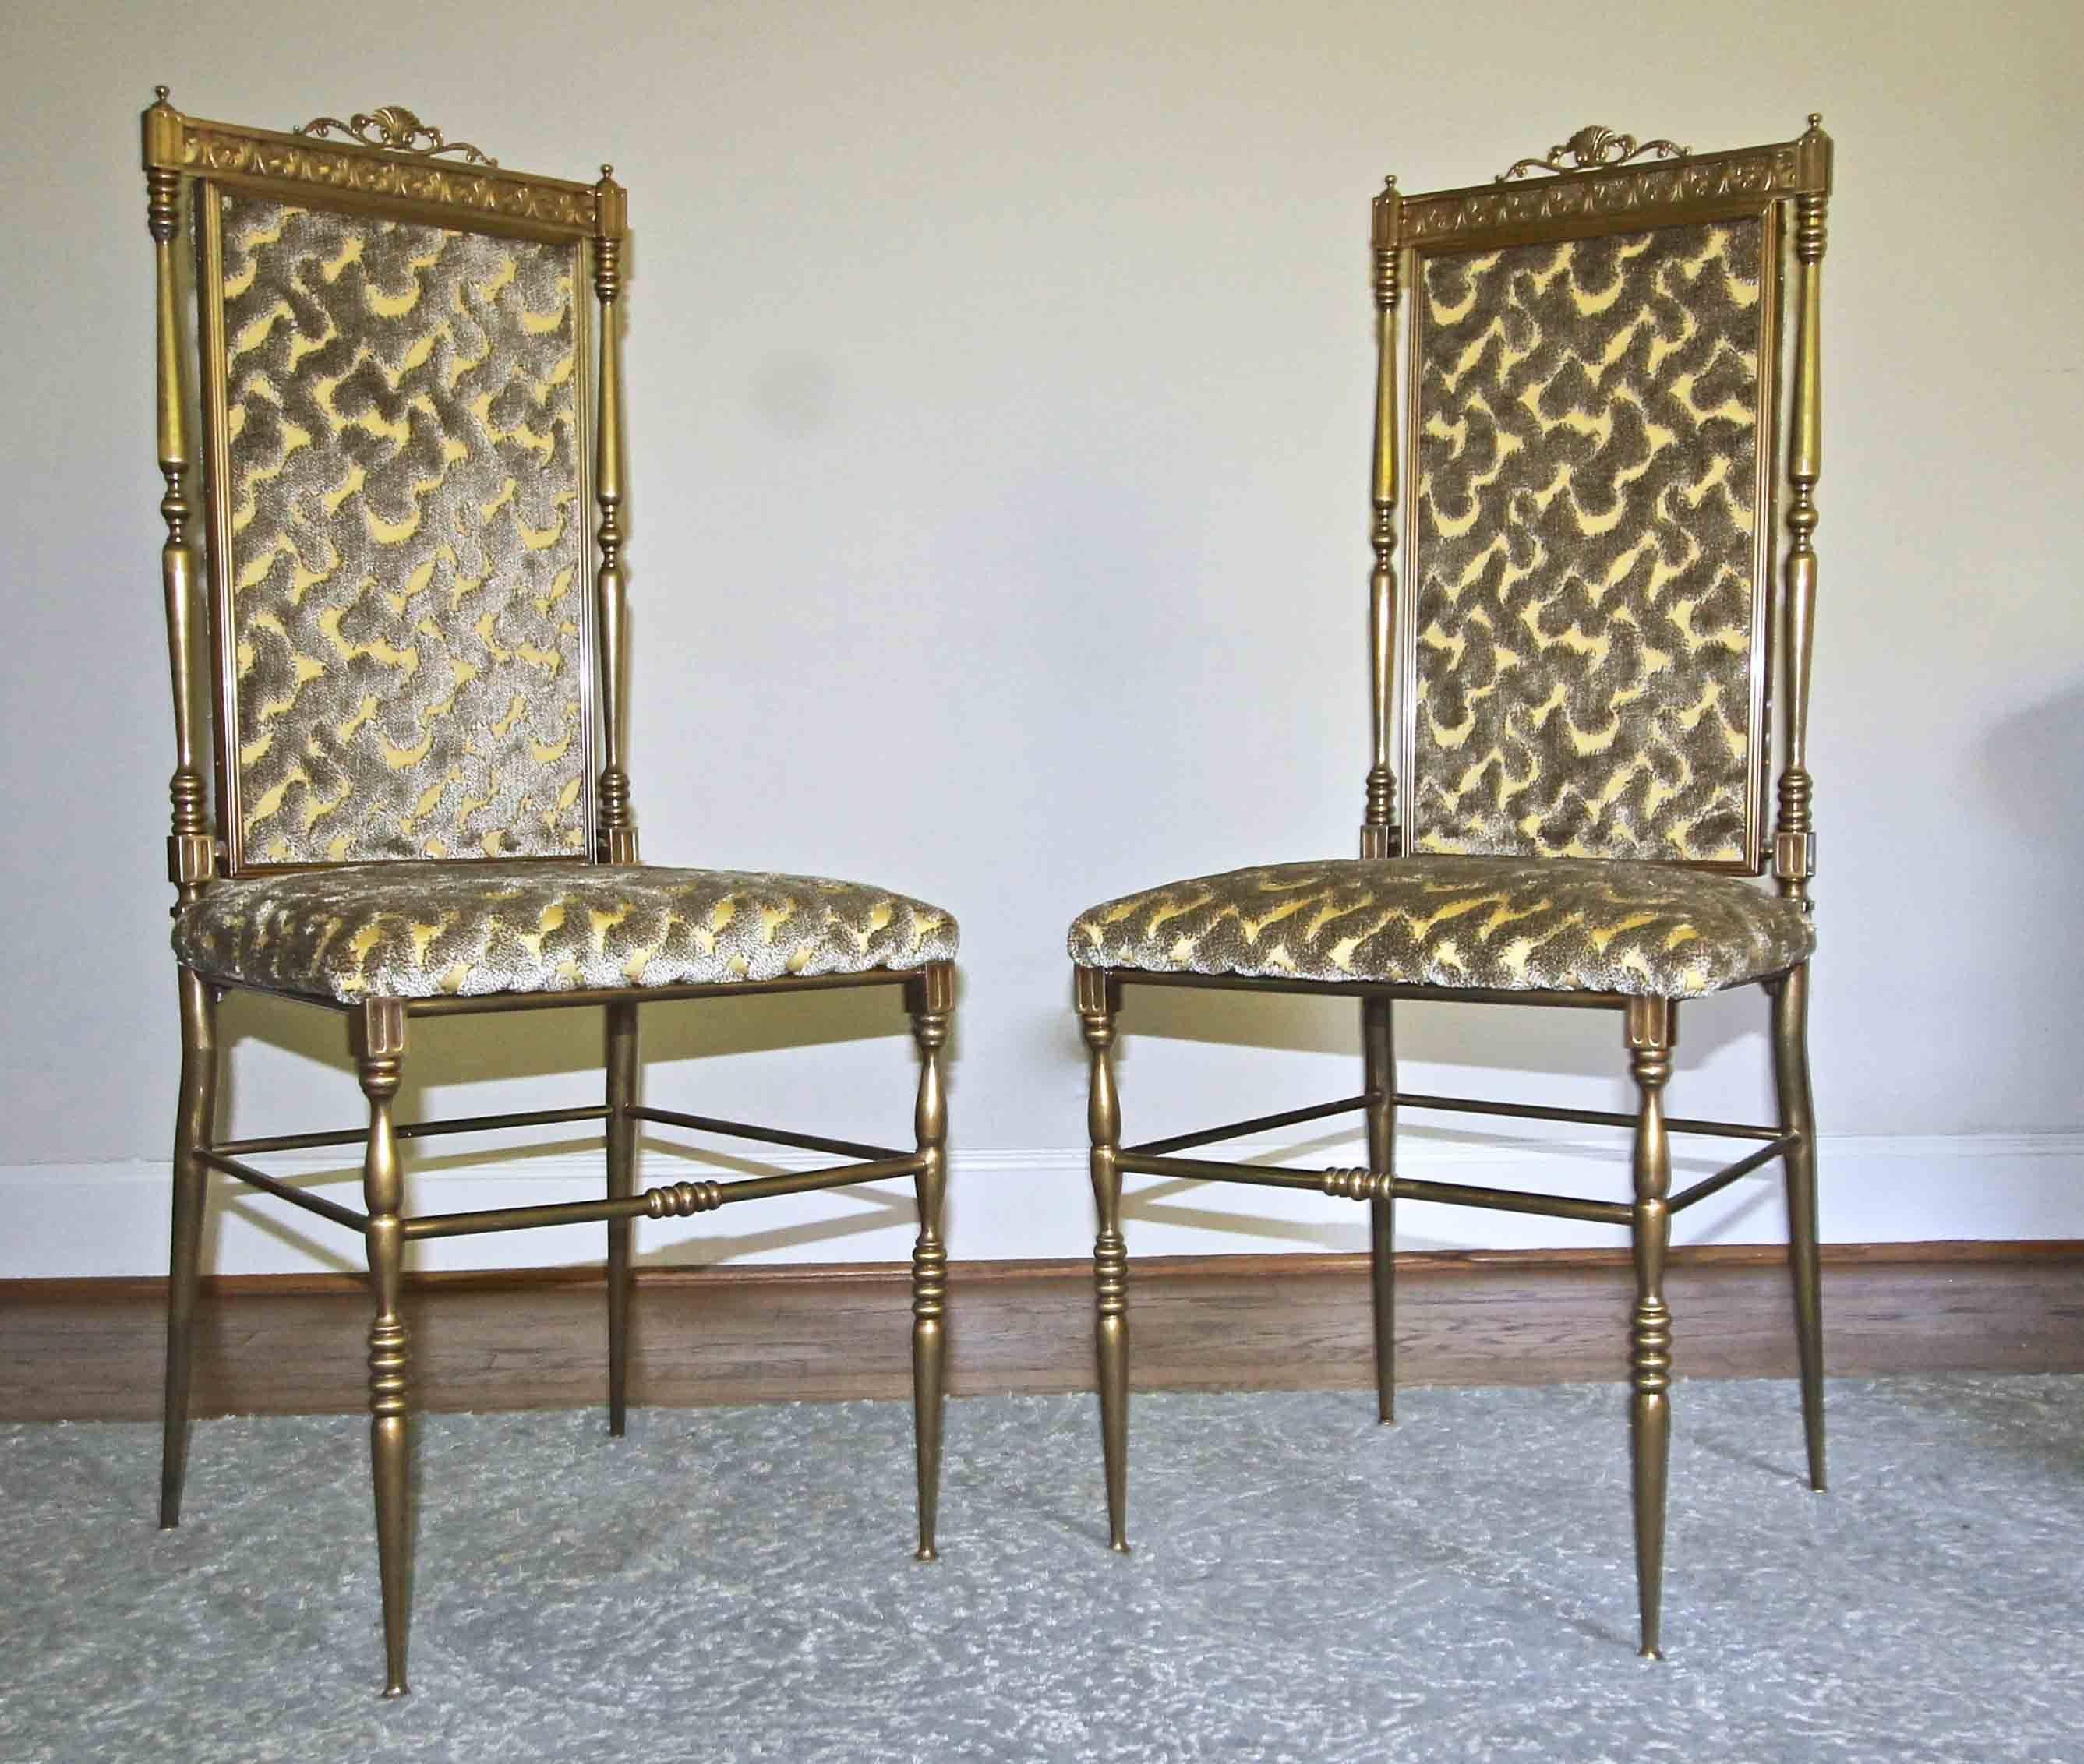 Pair of Chiavari neoclassic motif side chairs, newly upholstered in Zimmer Rohde cut velvet fabric. Tubular brass construction.